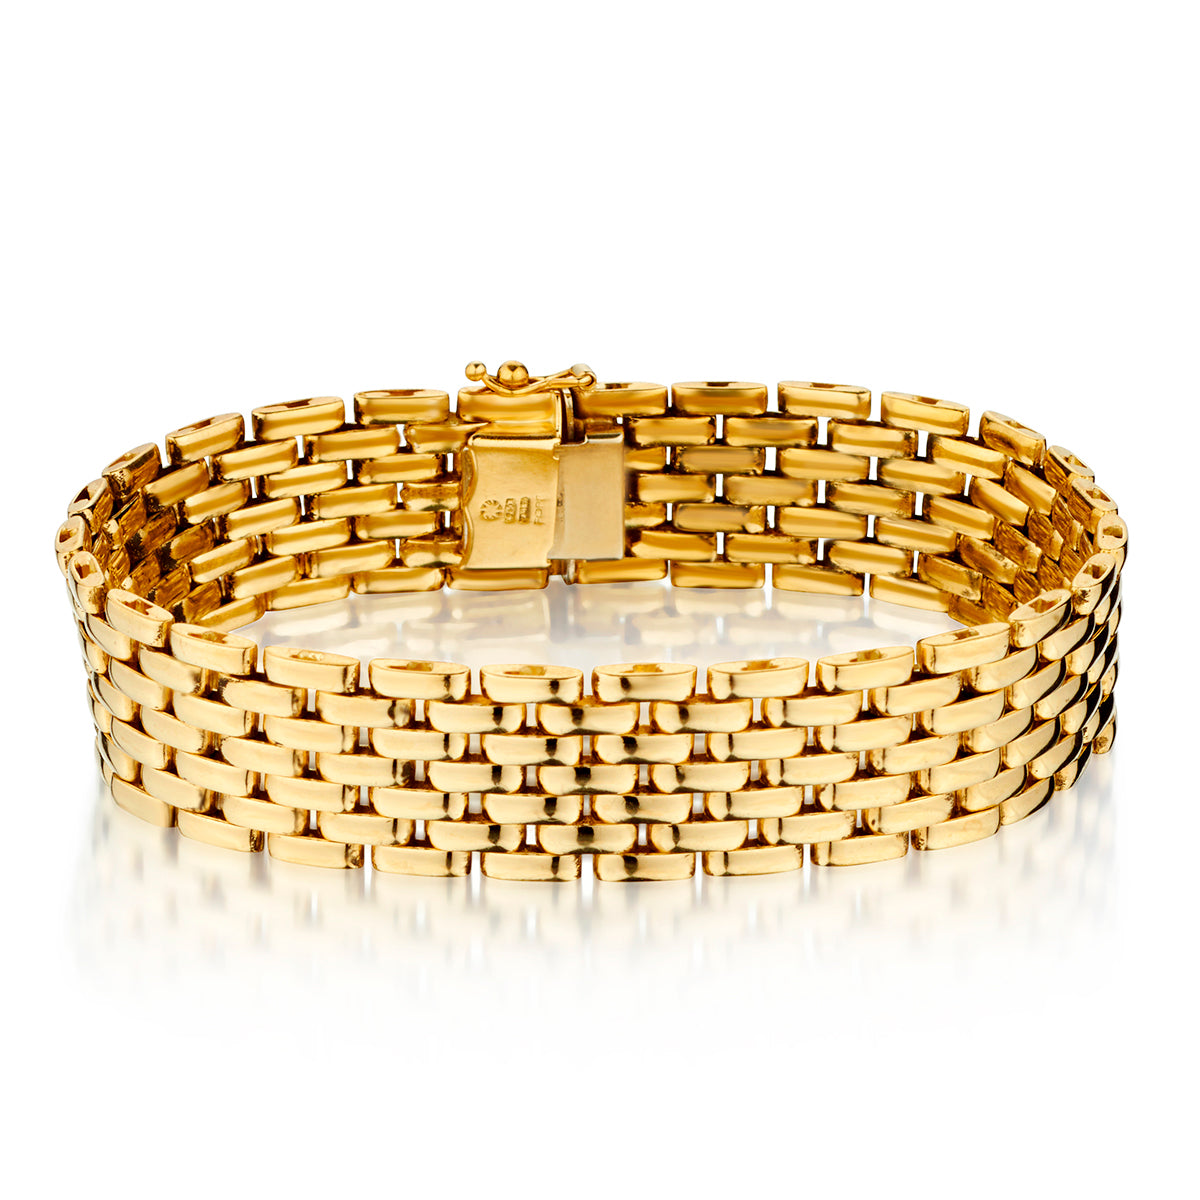 "Fope" 18kt Yellow Gold Panthere Style  Bracelet. Weight: 50.69 grams